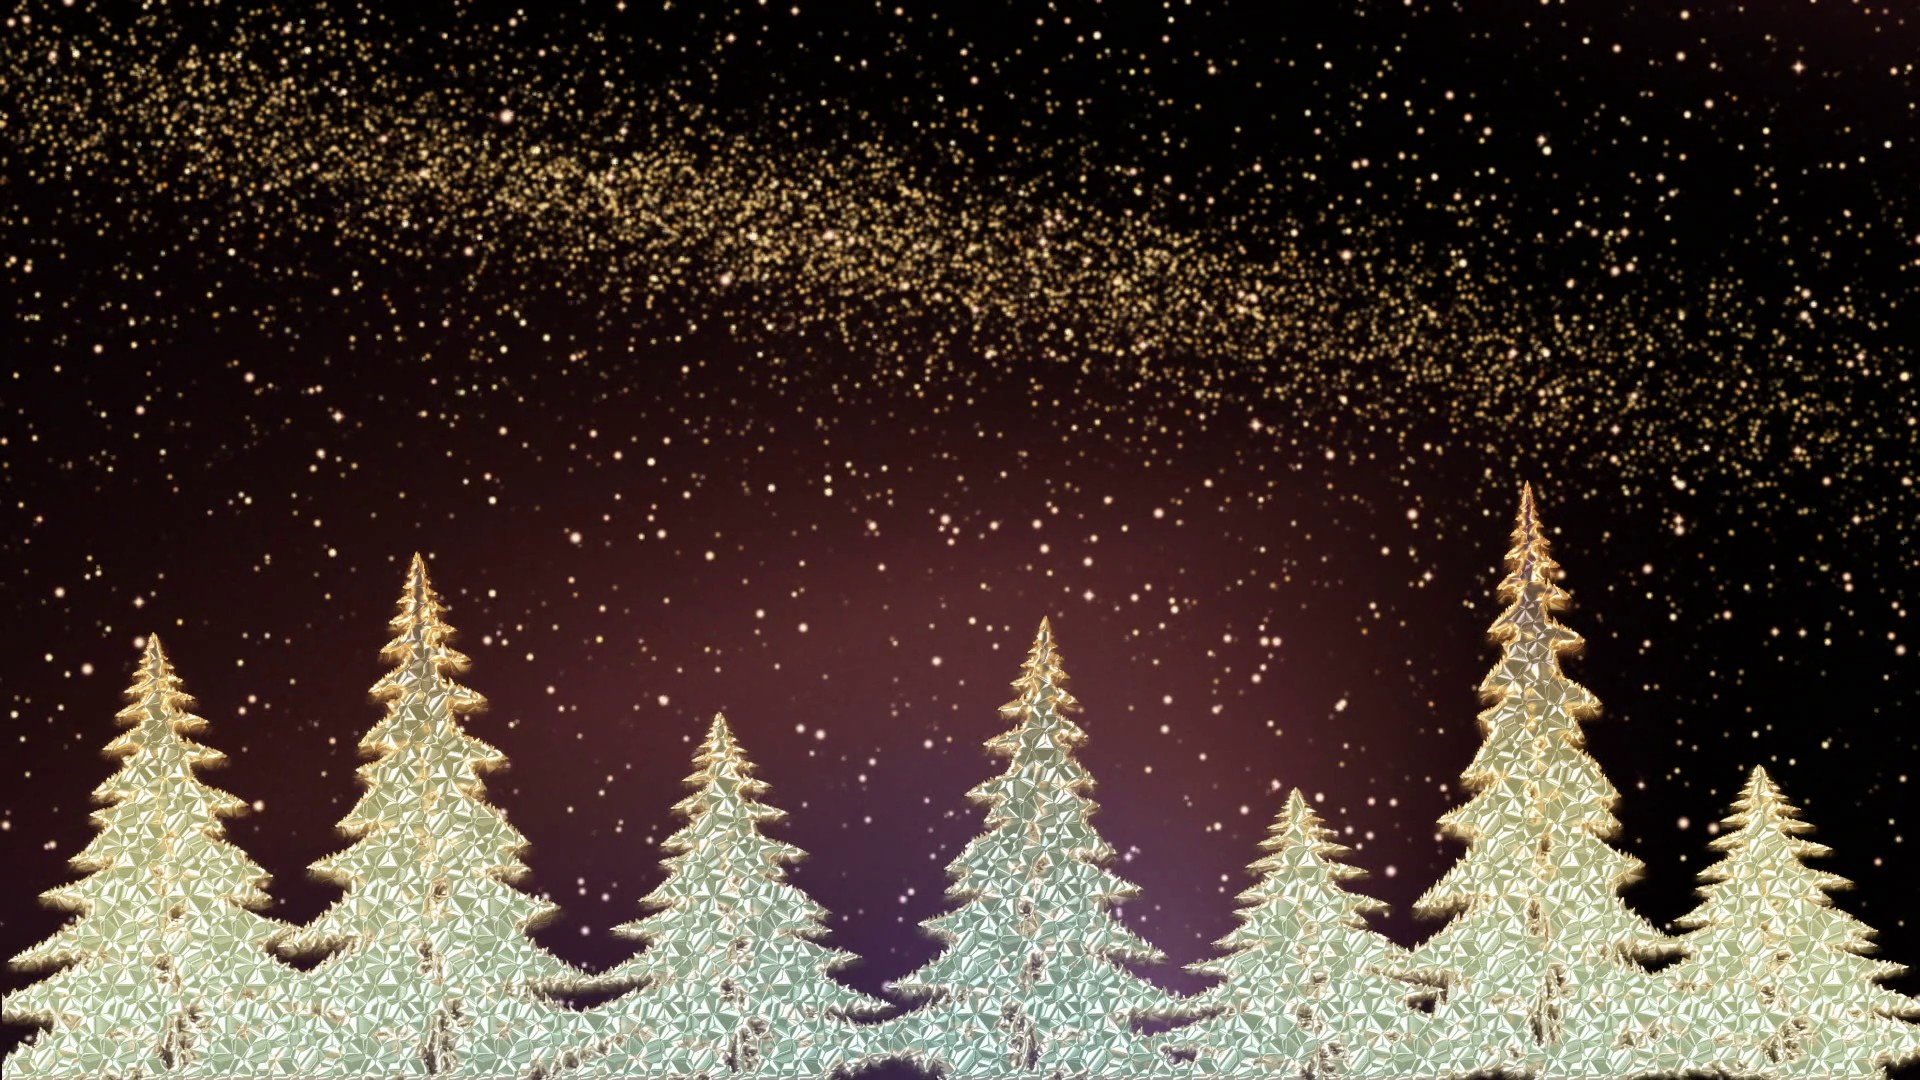 1920x1080 Sparkling decorated Christmas tree shining in the snowy night .